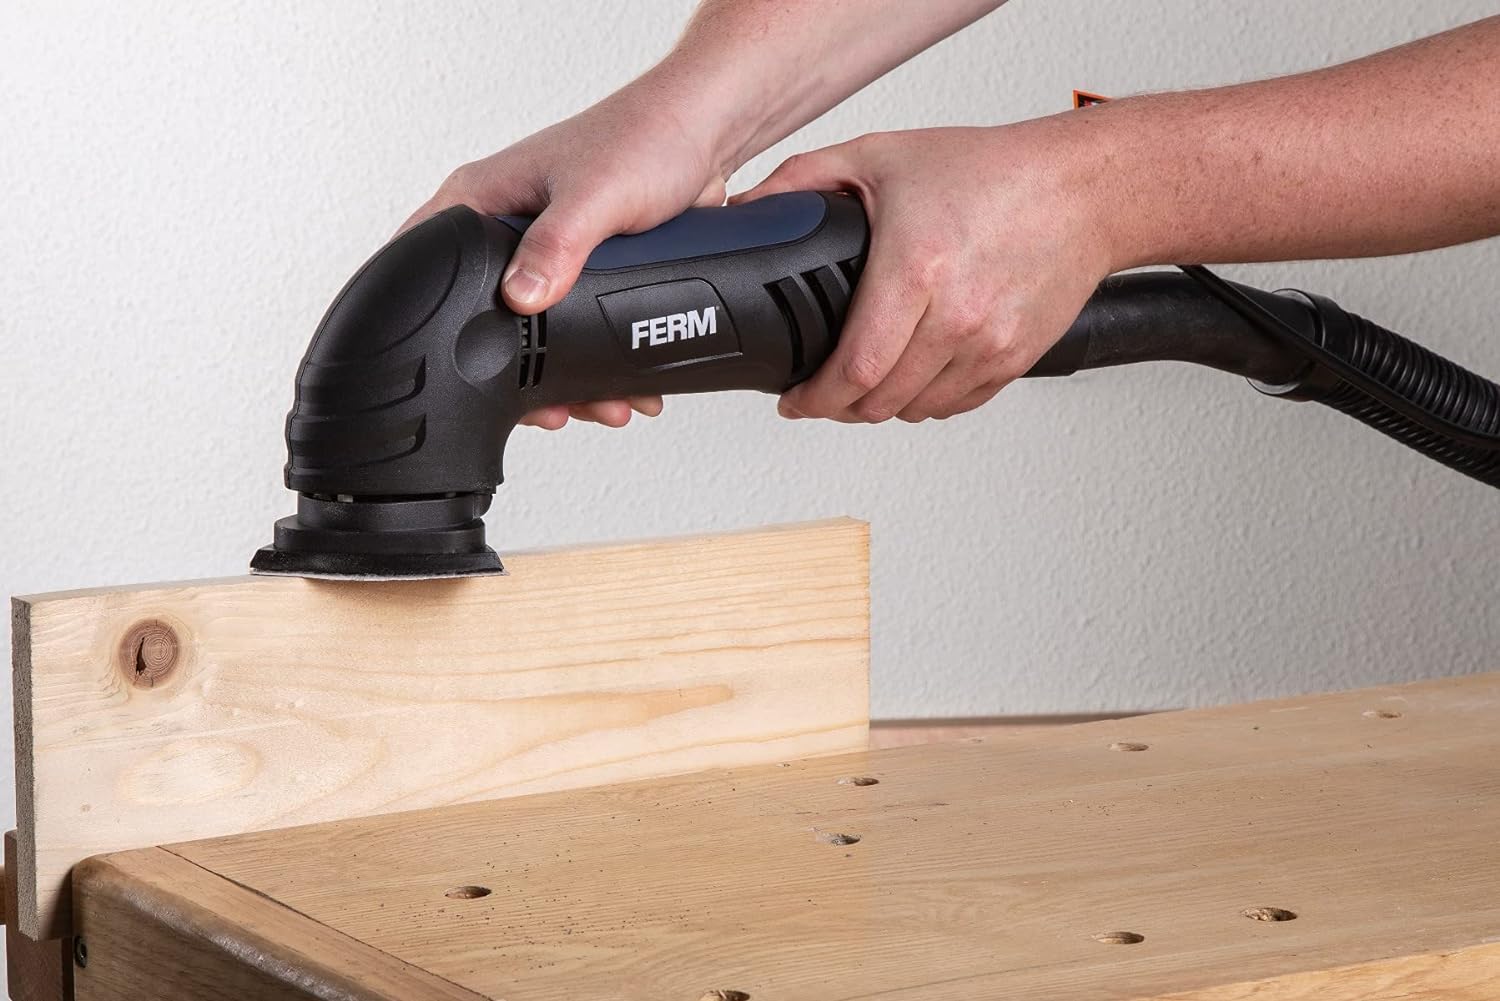 Ferm Delta Sander With Sanding Sheets And Dust Collection Adapter